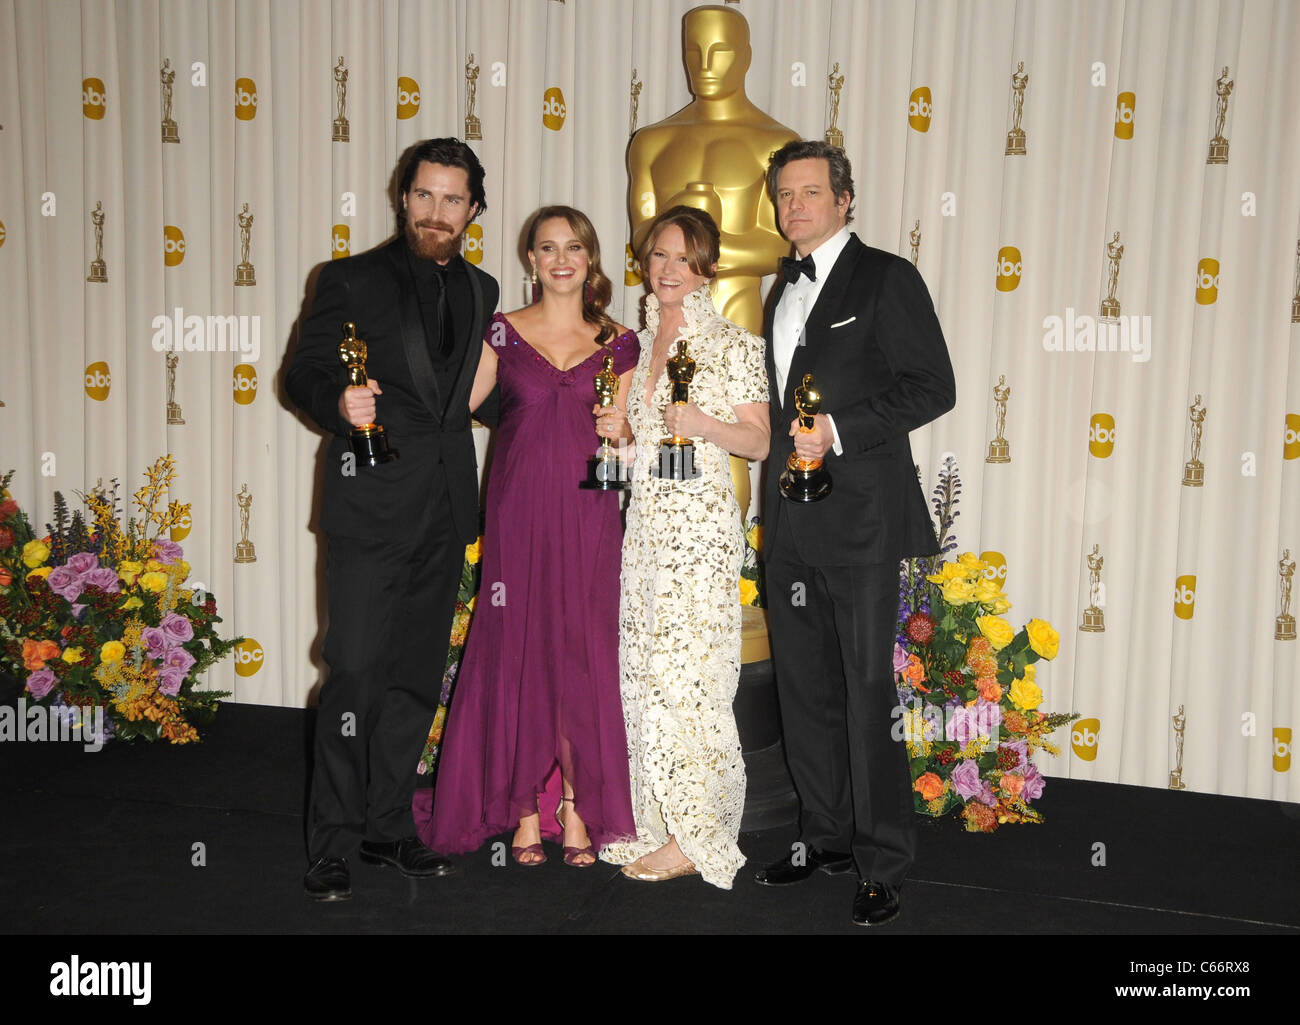 Christian Bale, Natalie Portman, Melissa Leo and Colin Firth in the press room for The 83rd Academy Awards Oscars - Press Room, Stock Photo